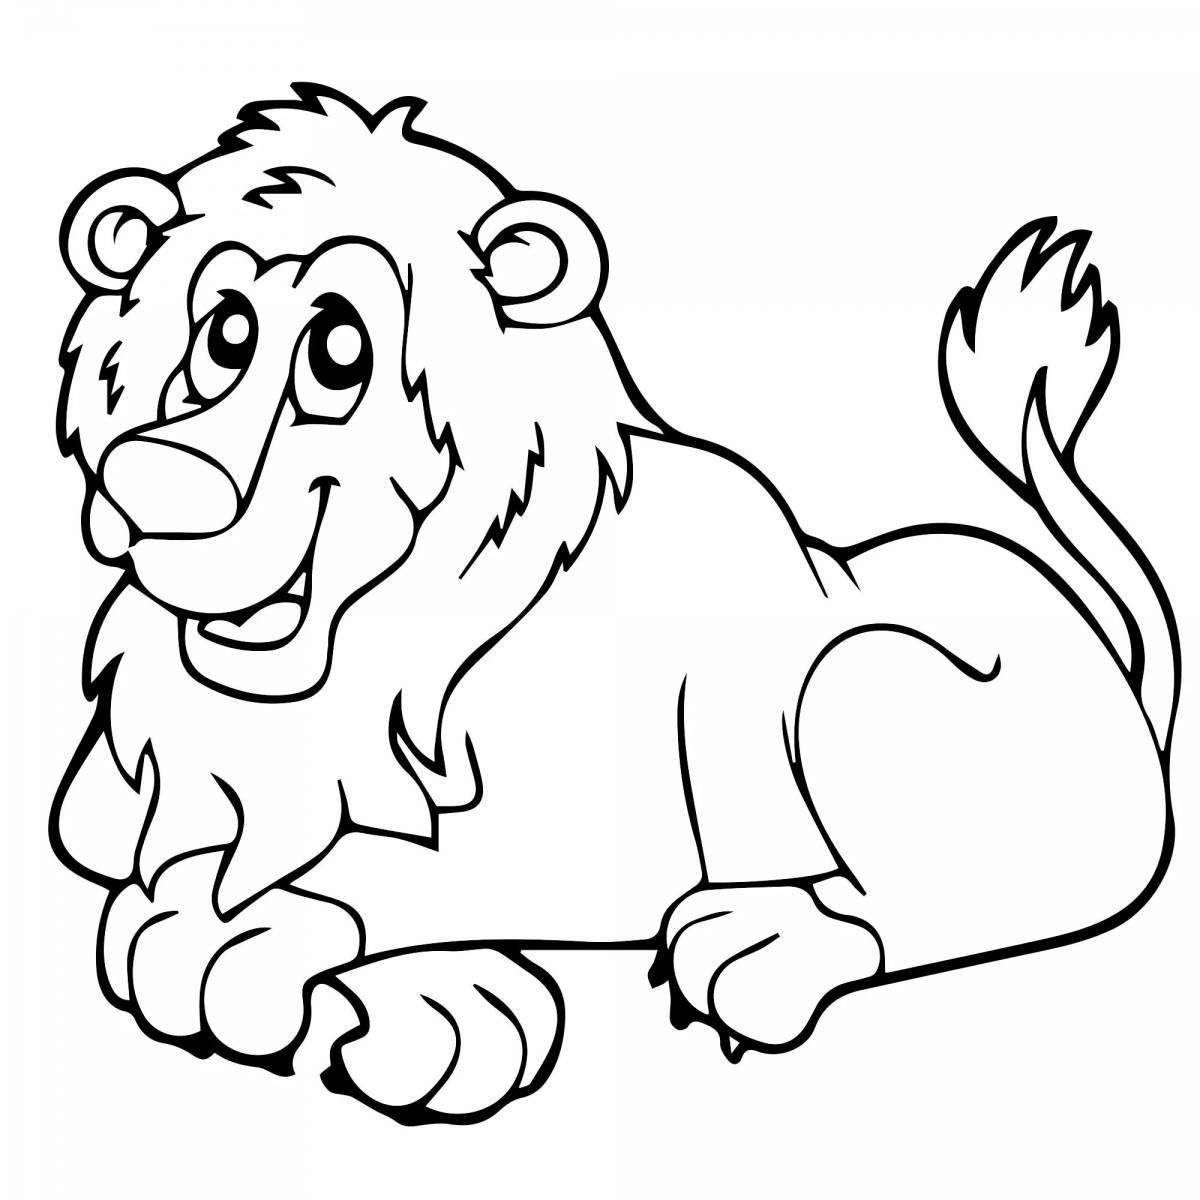 Realistic drawing of a lion for children